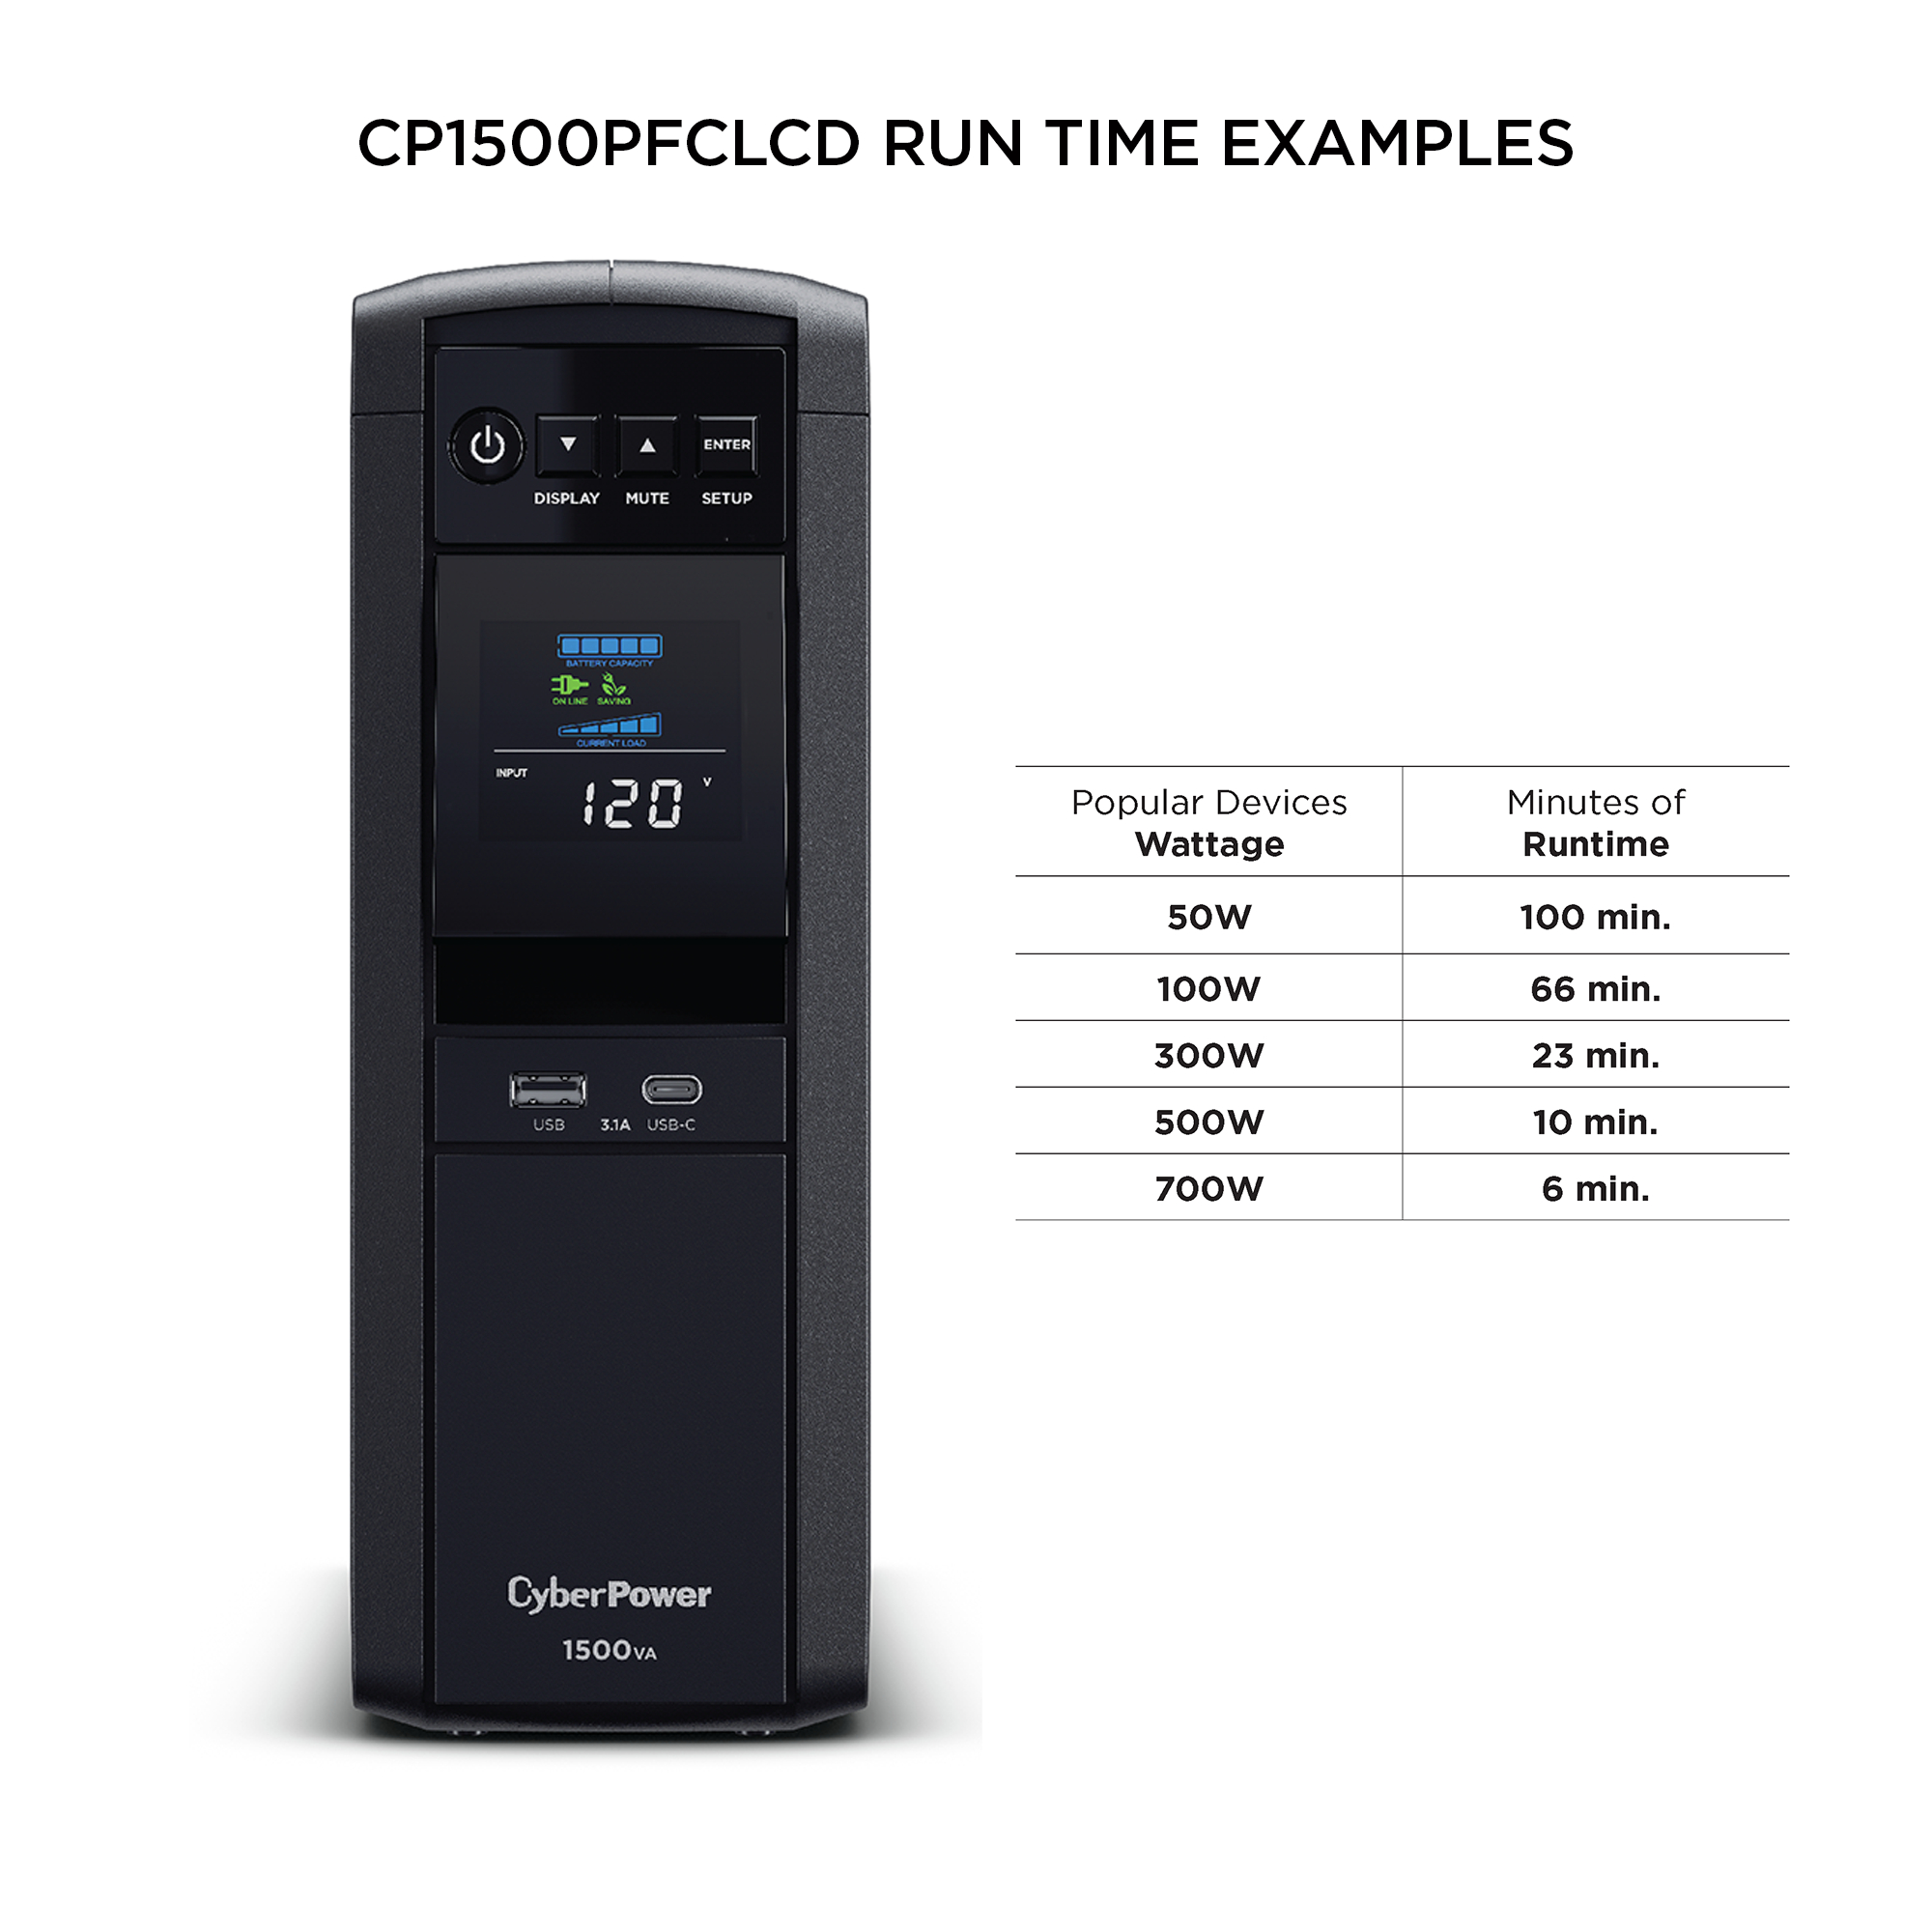 CP1500PFCLCD PFC Sinewave UPS Series Product Details, Specs, Downloads  CyberPower